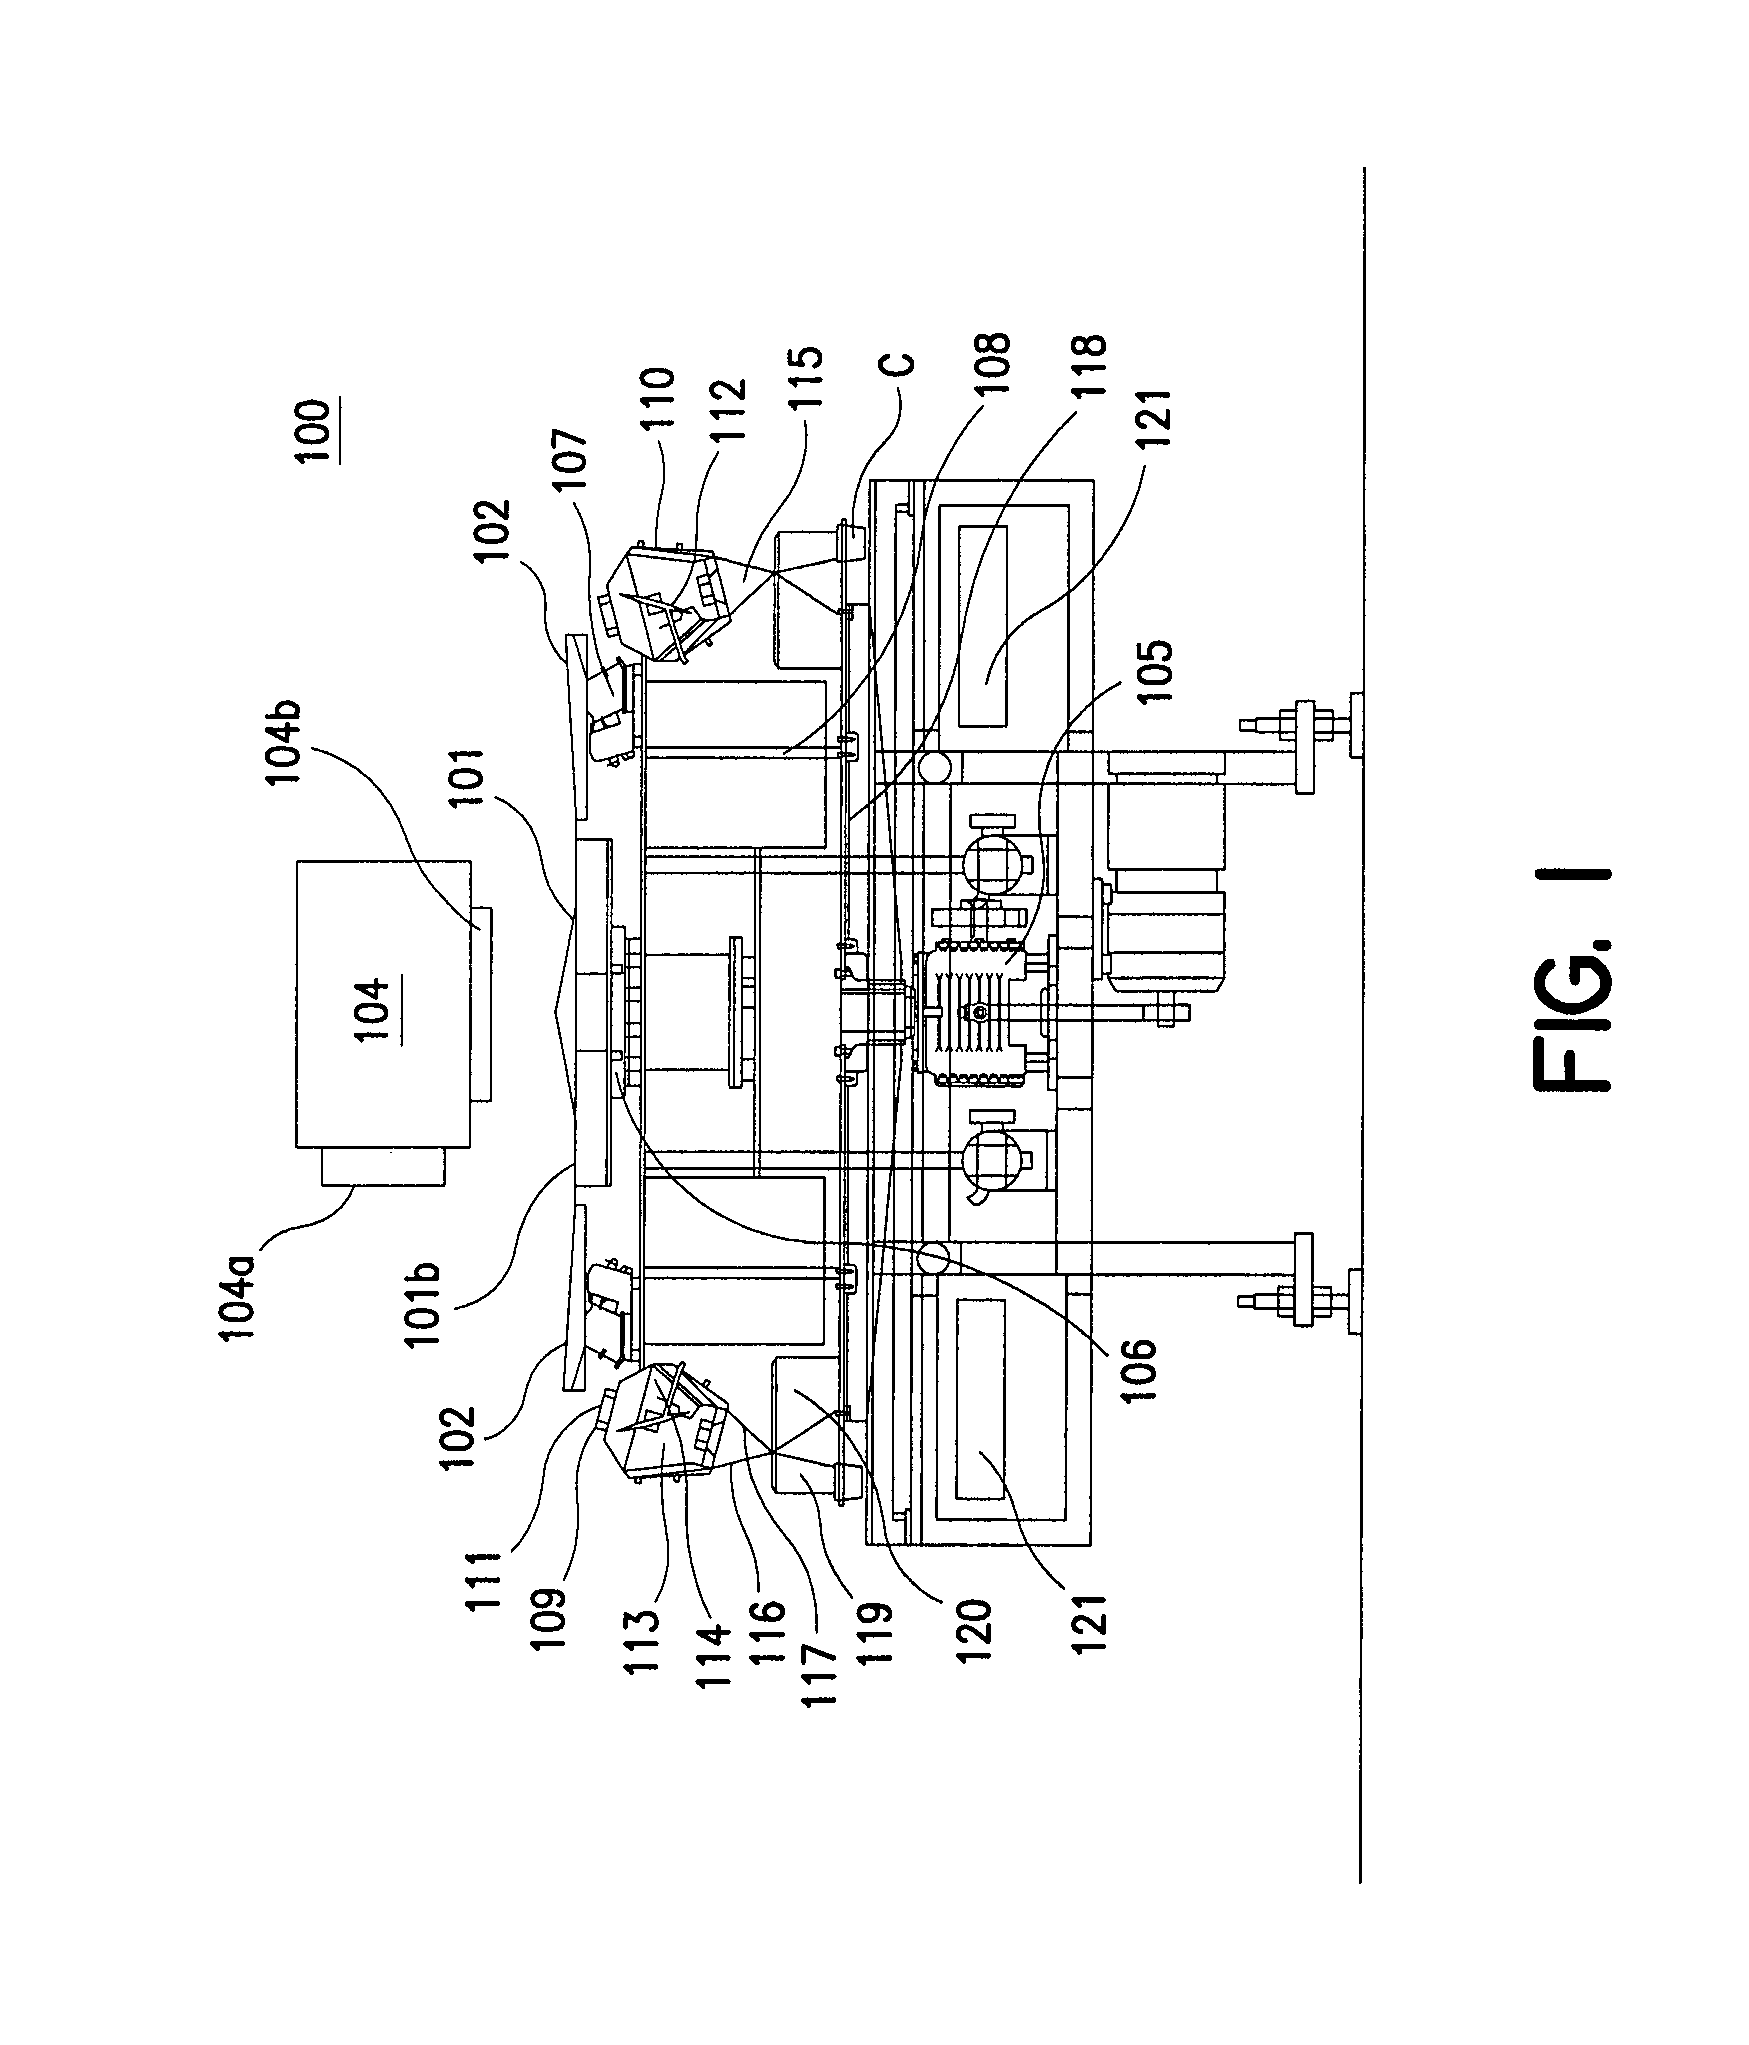 Dispensing and diversion systems and methods